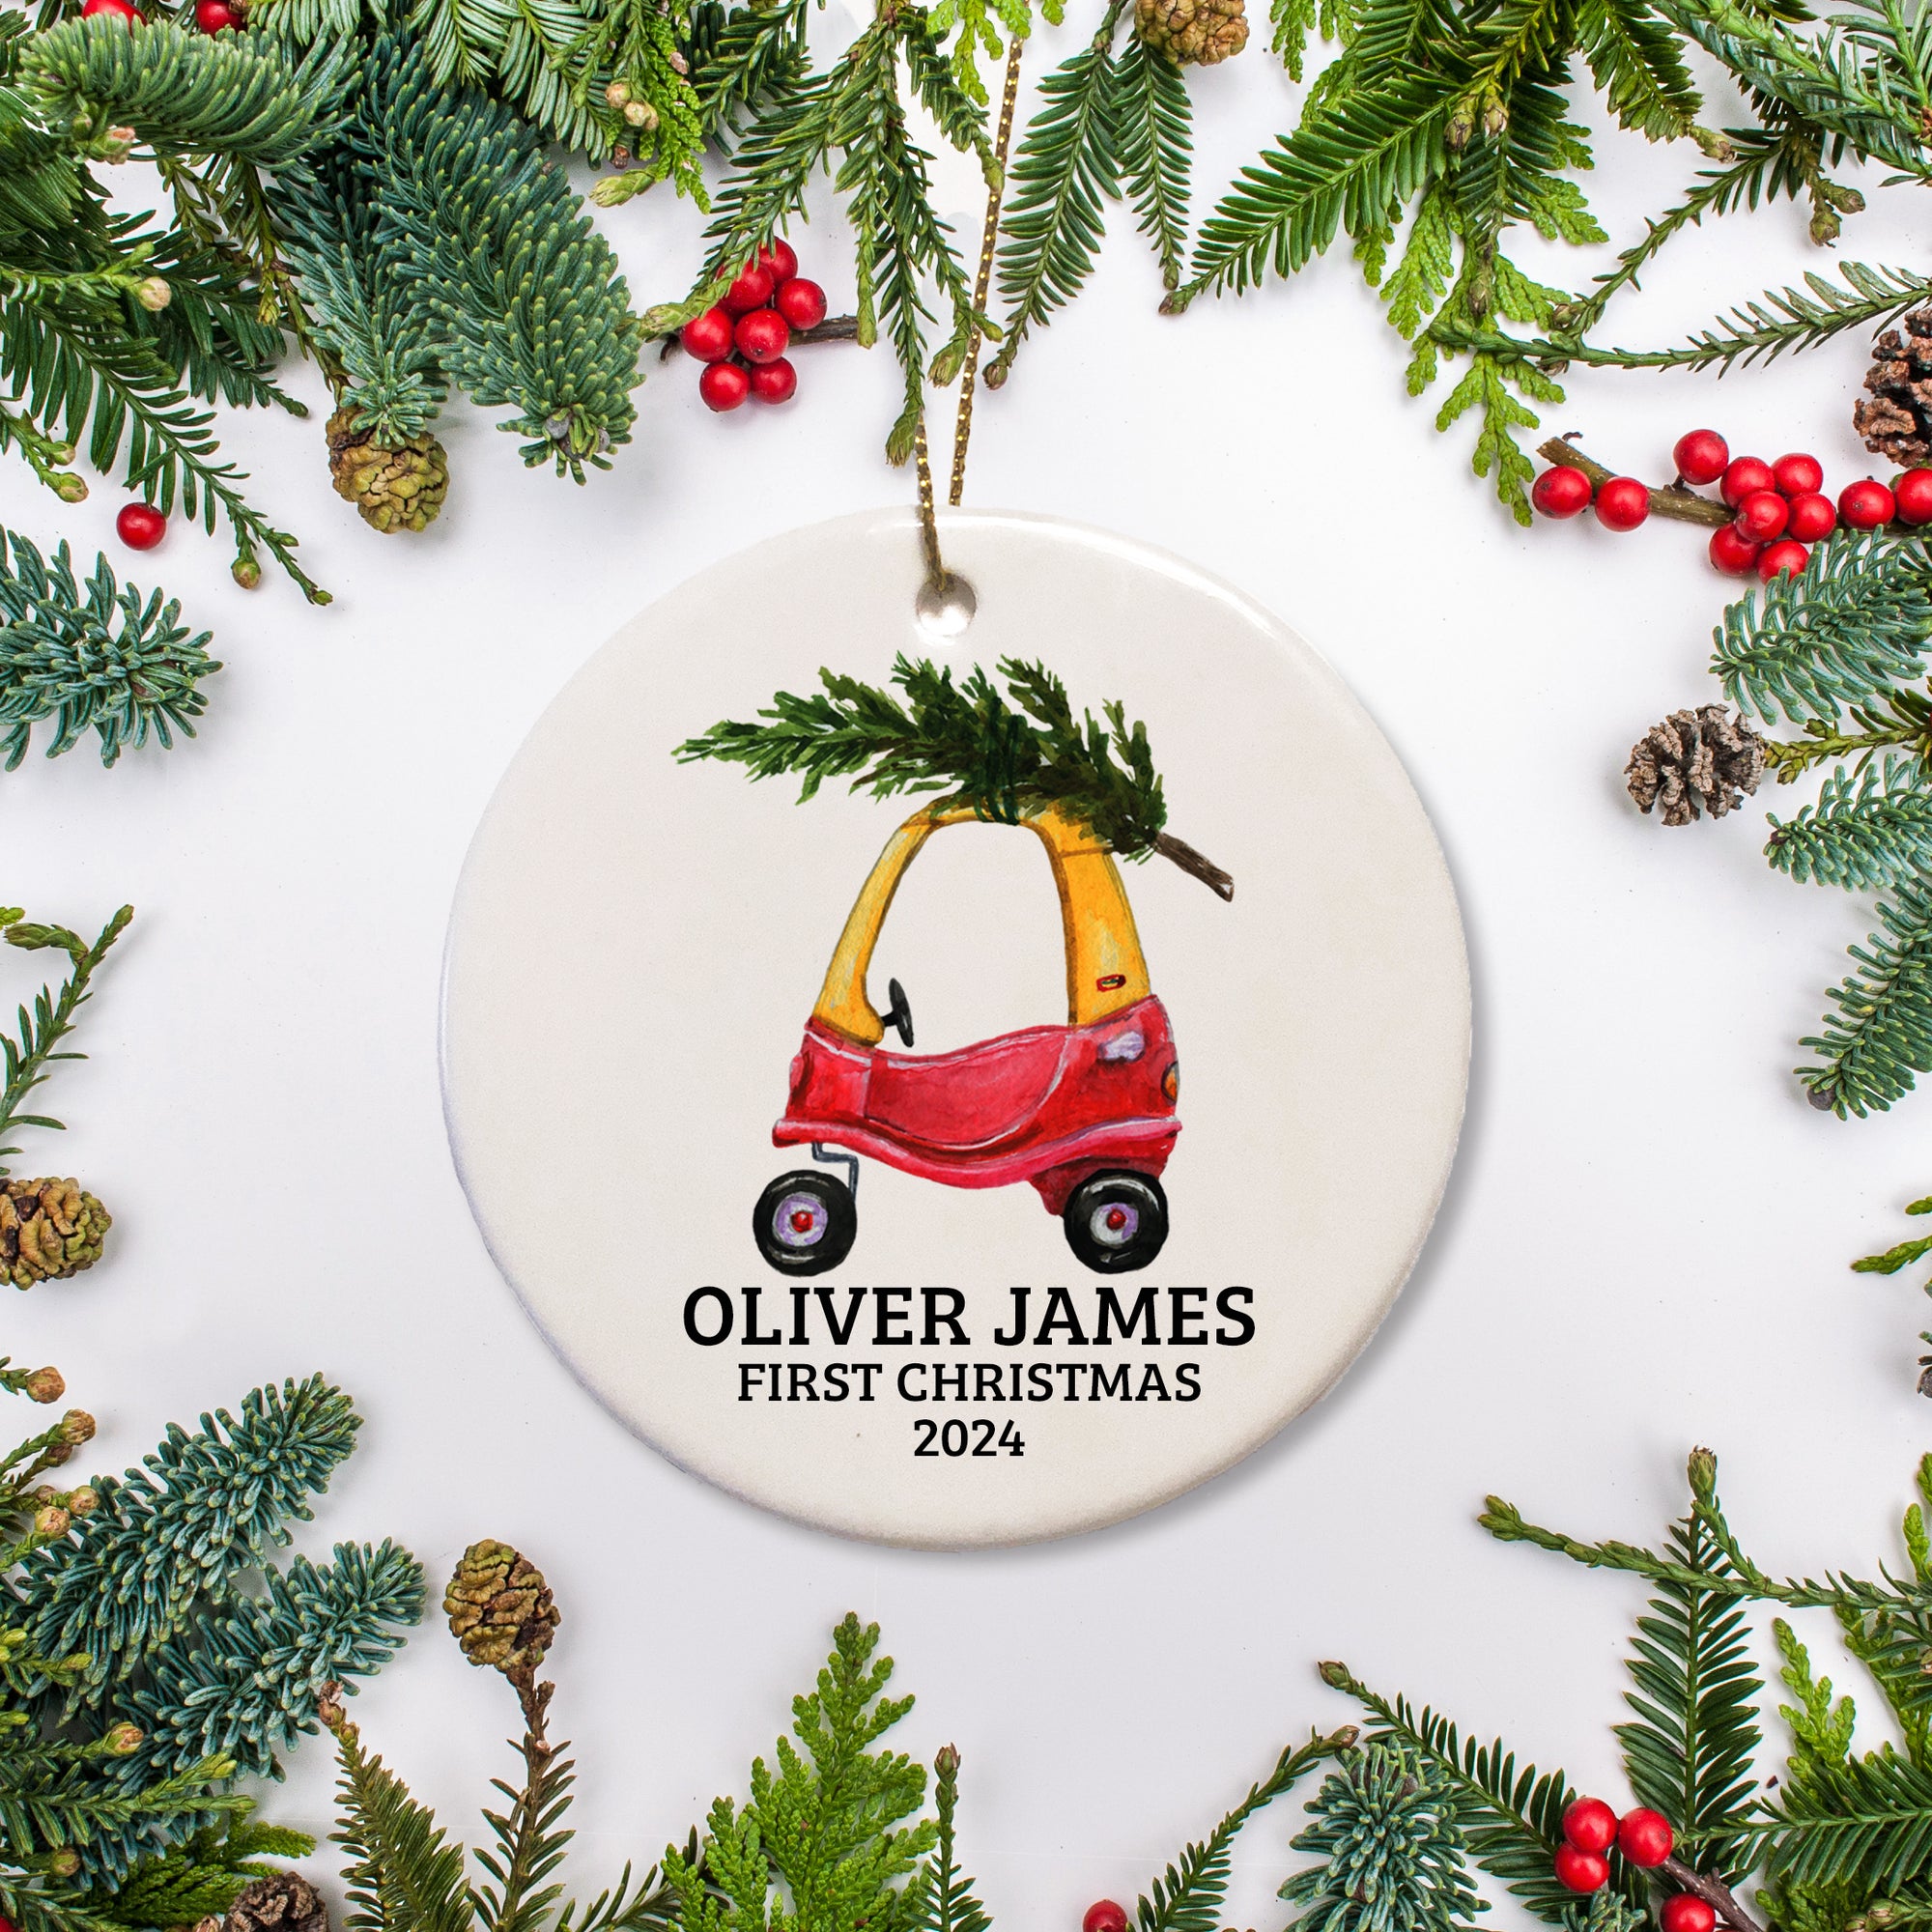 A toddler's  red and yellor car personalized on a ceramic ornament with a Christmas tree. This is a keepsake.